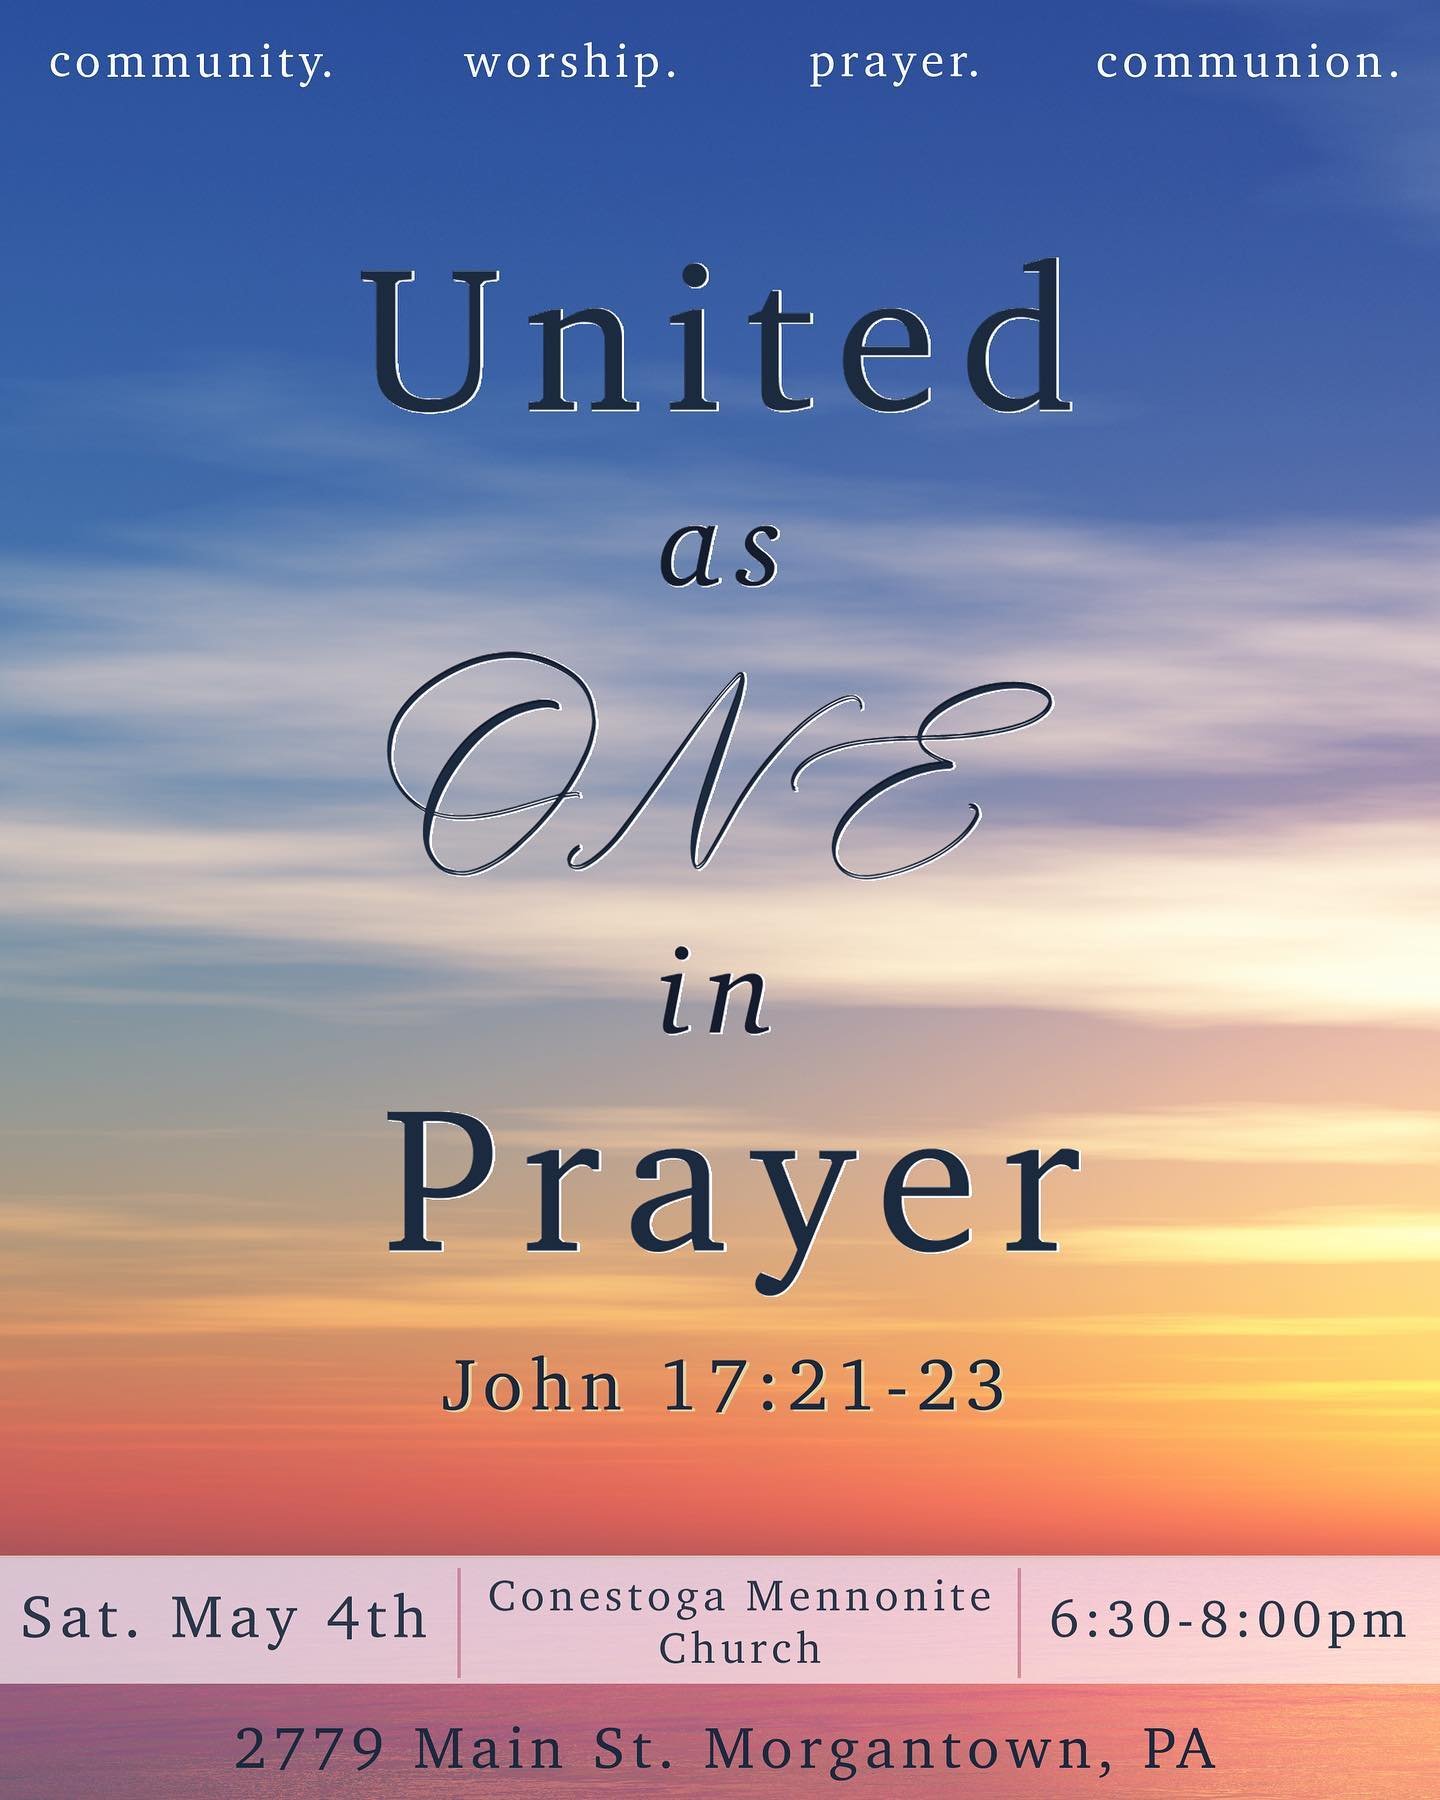 CMC has the privilege to host an event to gather together with local churches and unite as one in prayer. We hope you&rsquo;ll join us as we worship, pray and seek the Lord together for our community! 

Next Saturday, May 4th from 6:30-8:30pm.